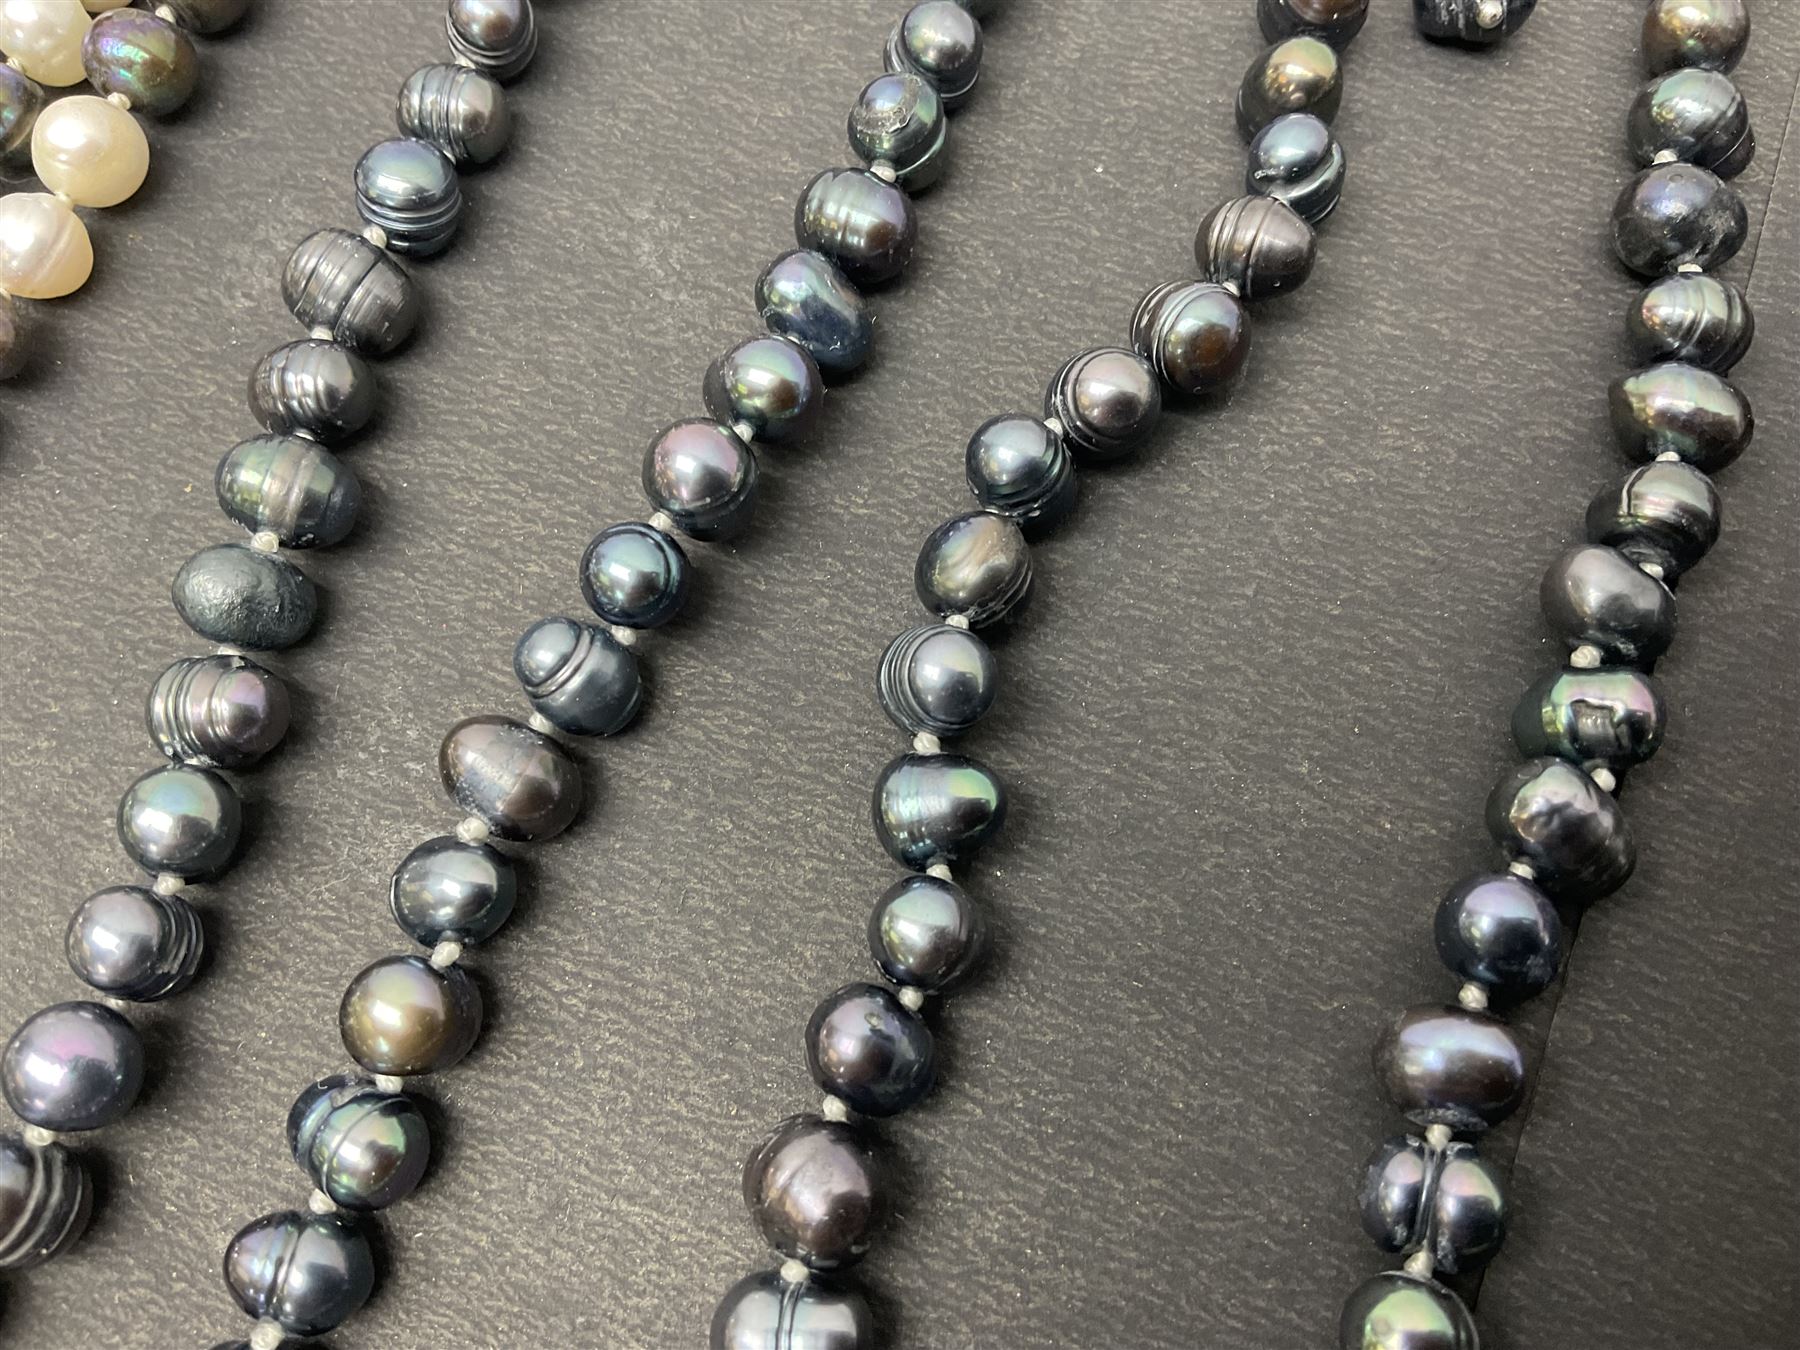 Four fresh water pearl necklaces - Image 75 of 77